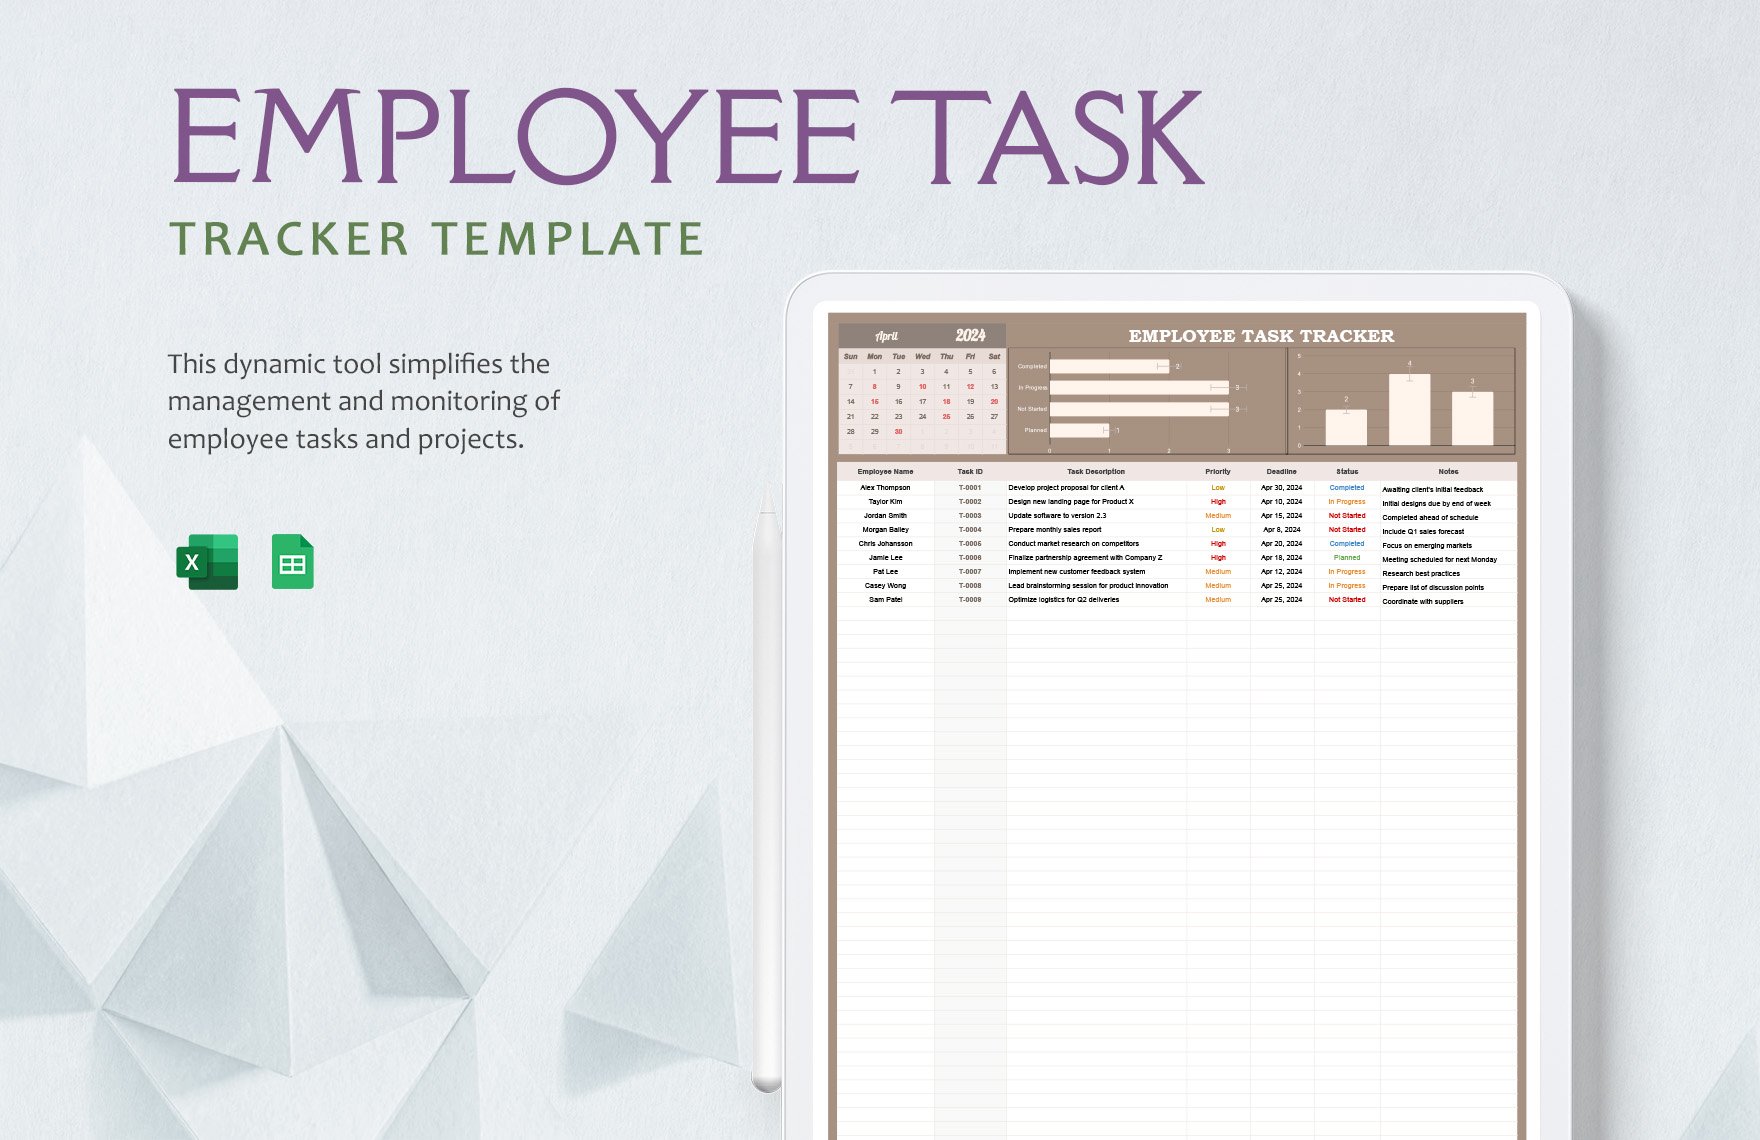 Employee Task Tracker Template in Excel, Google Sheets